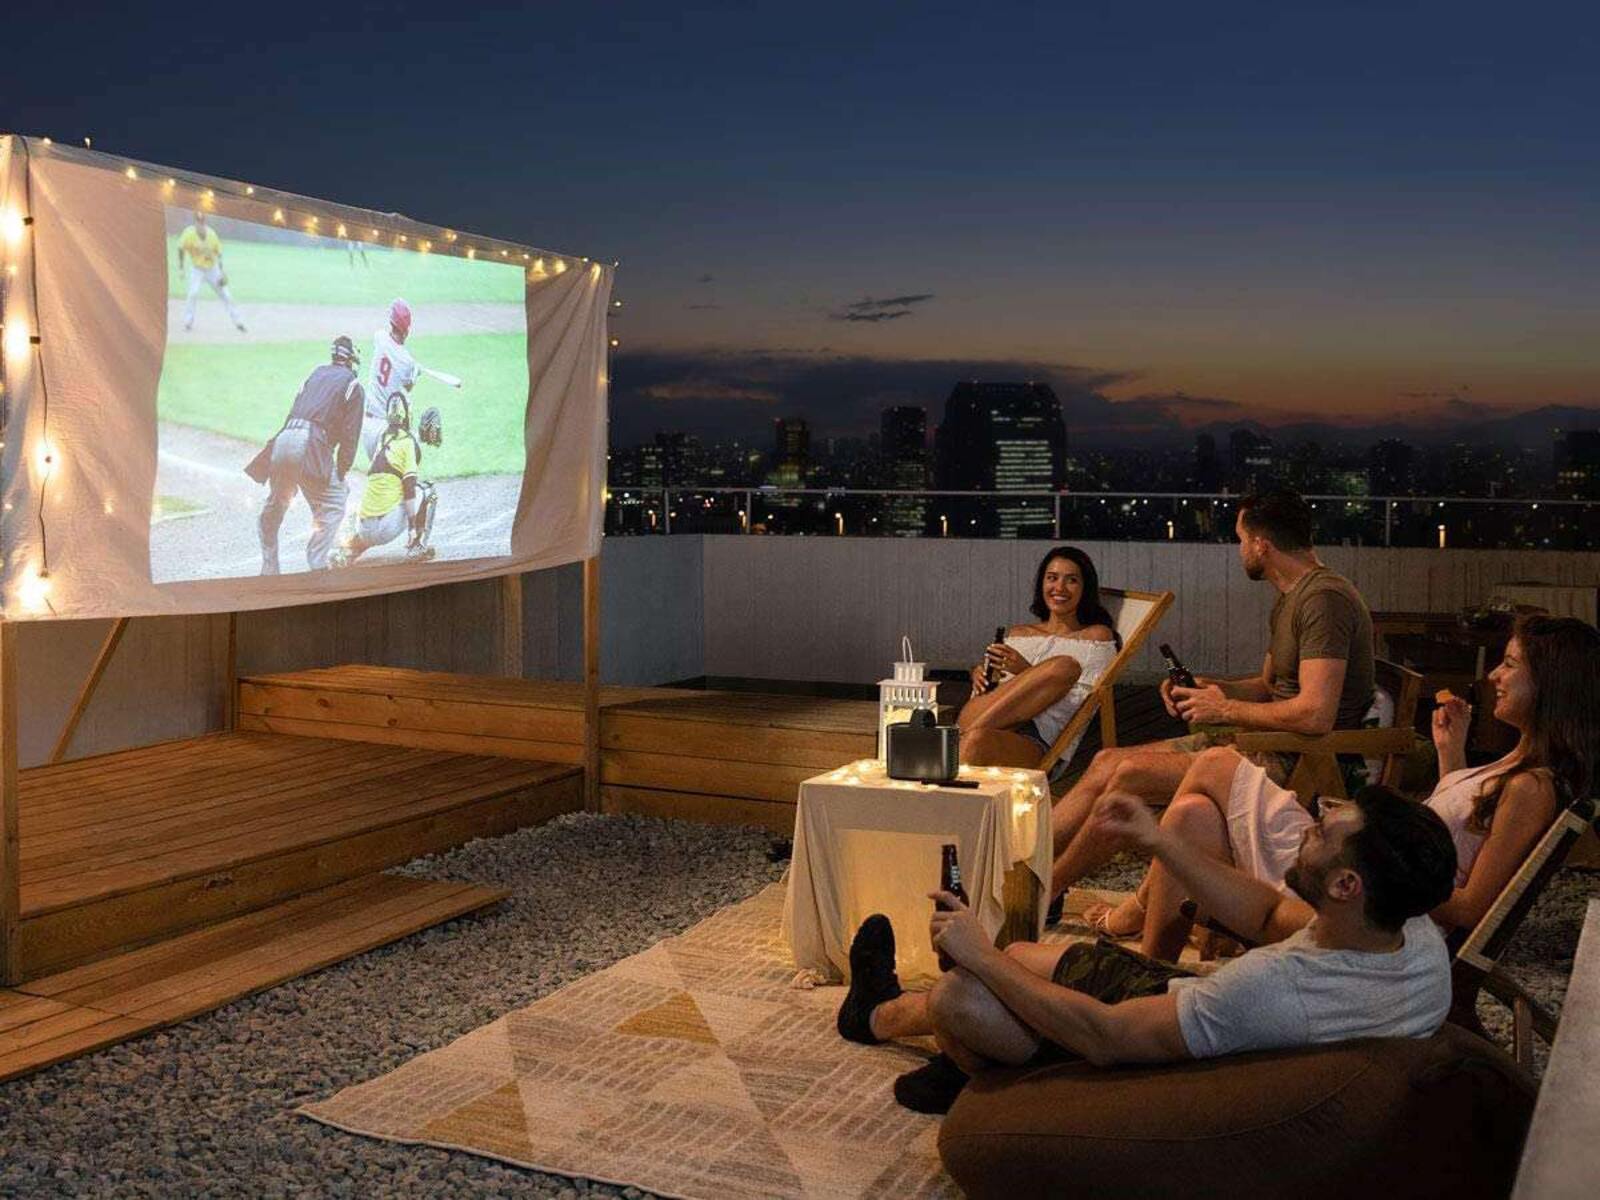 How To Watch TV Outside On A Projector